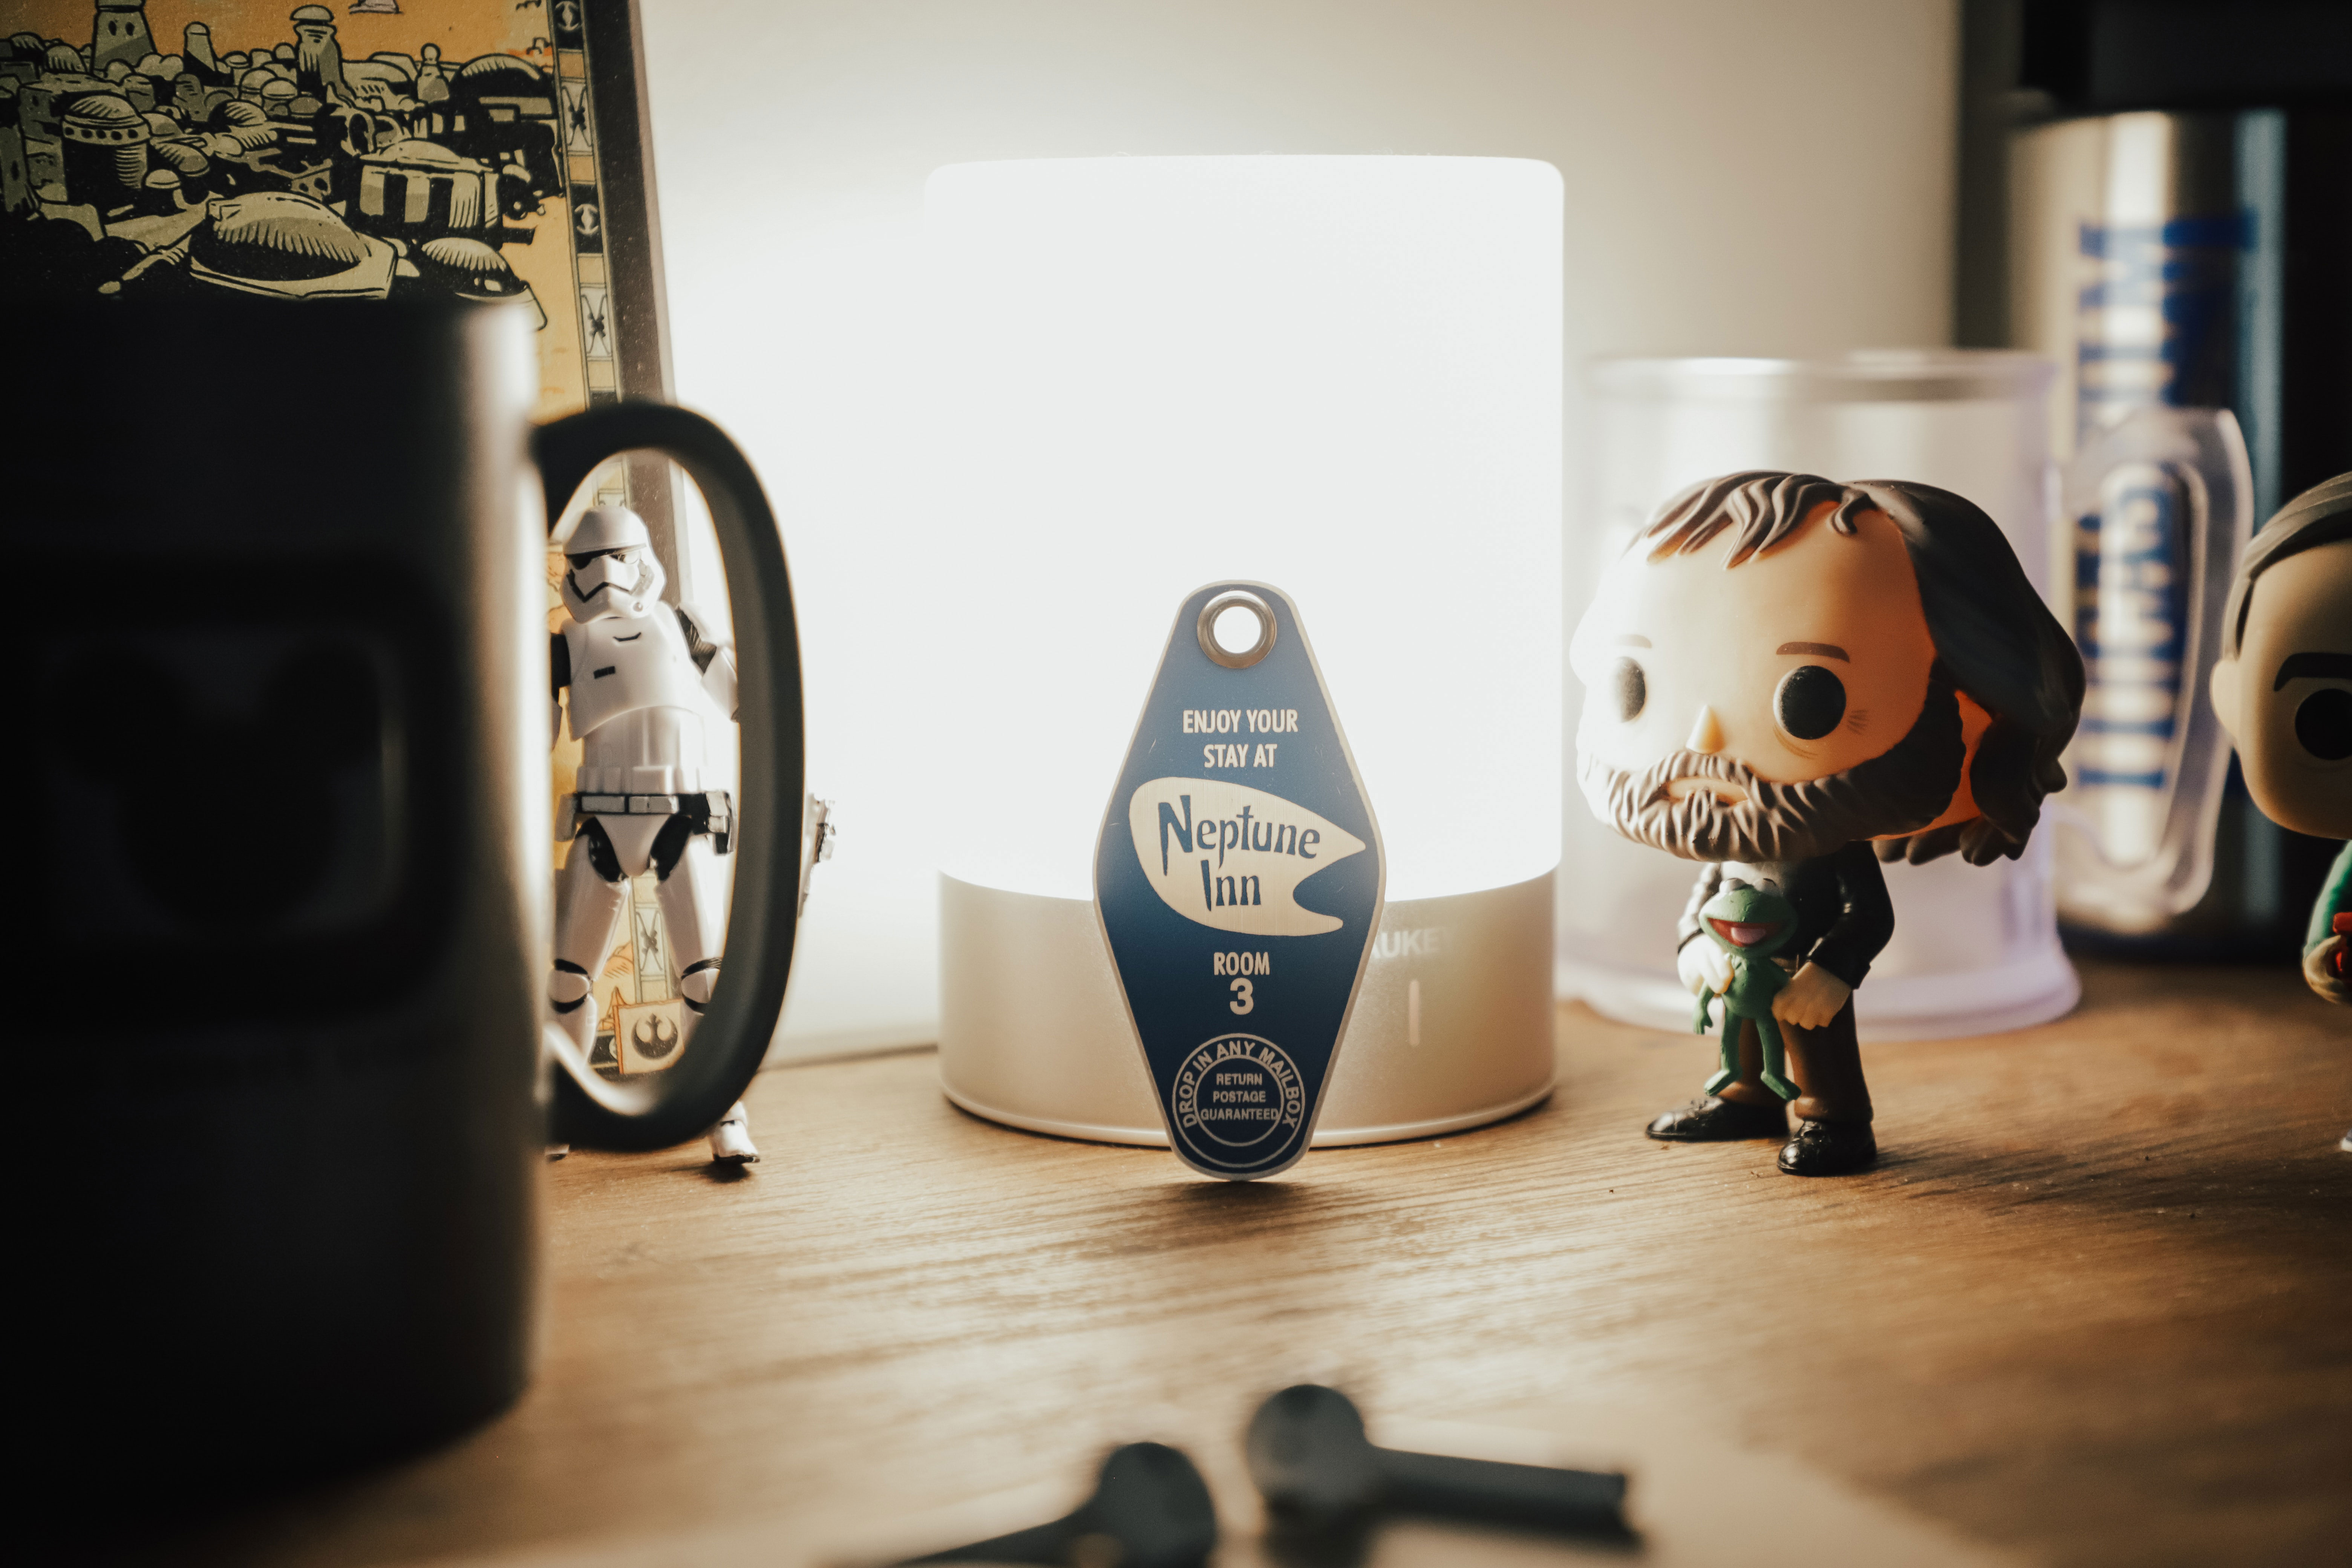 A Star Wars Funko Pop displayed on a wooden table next to a light and other Star Wars merchandise